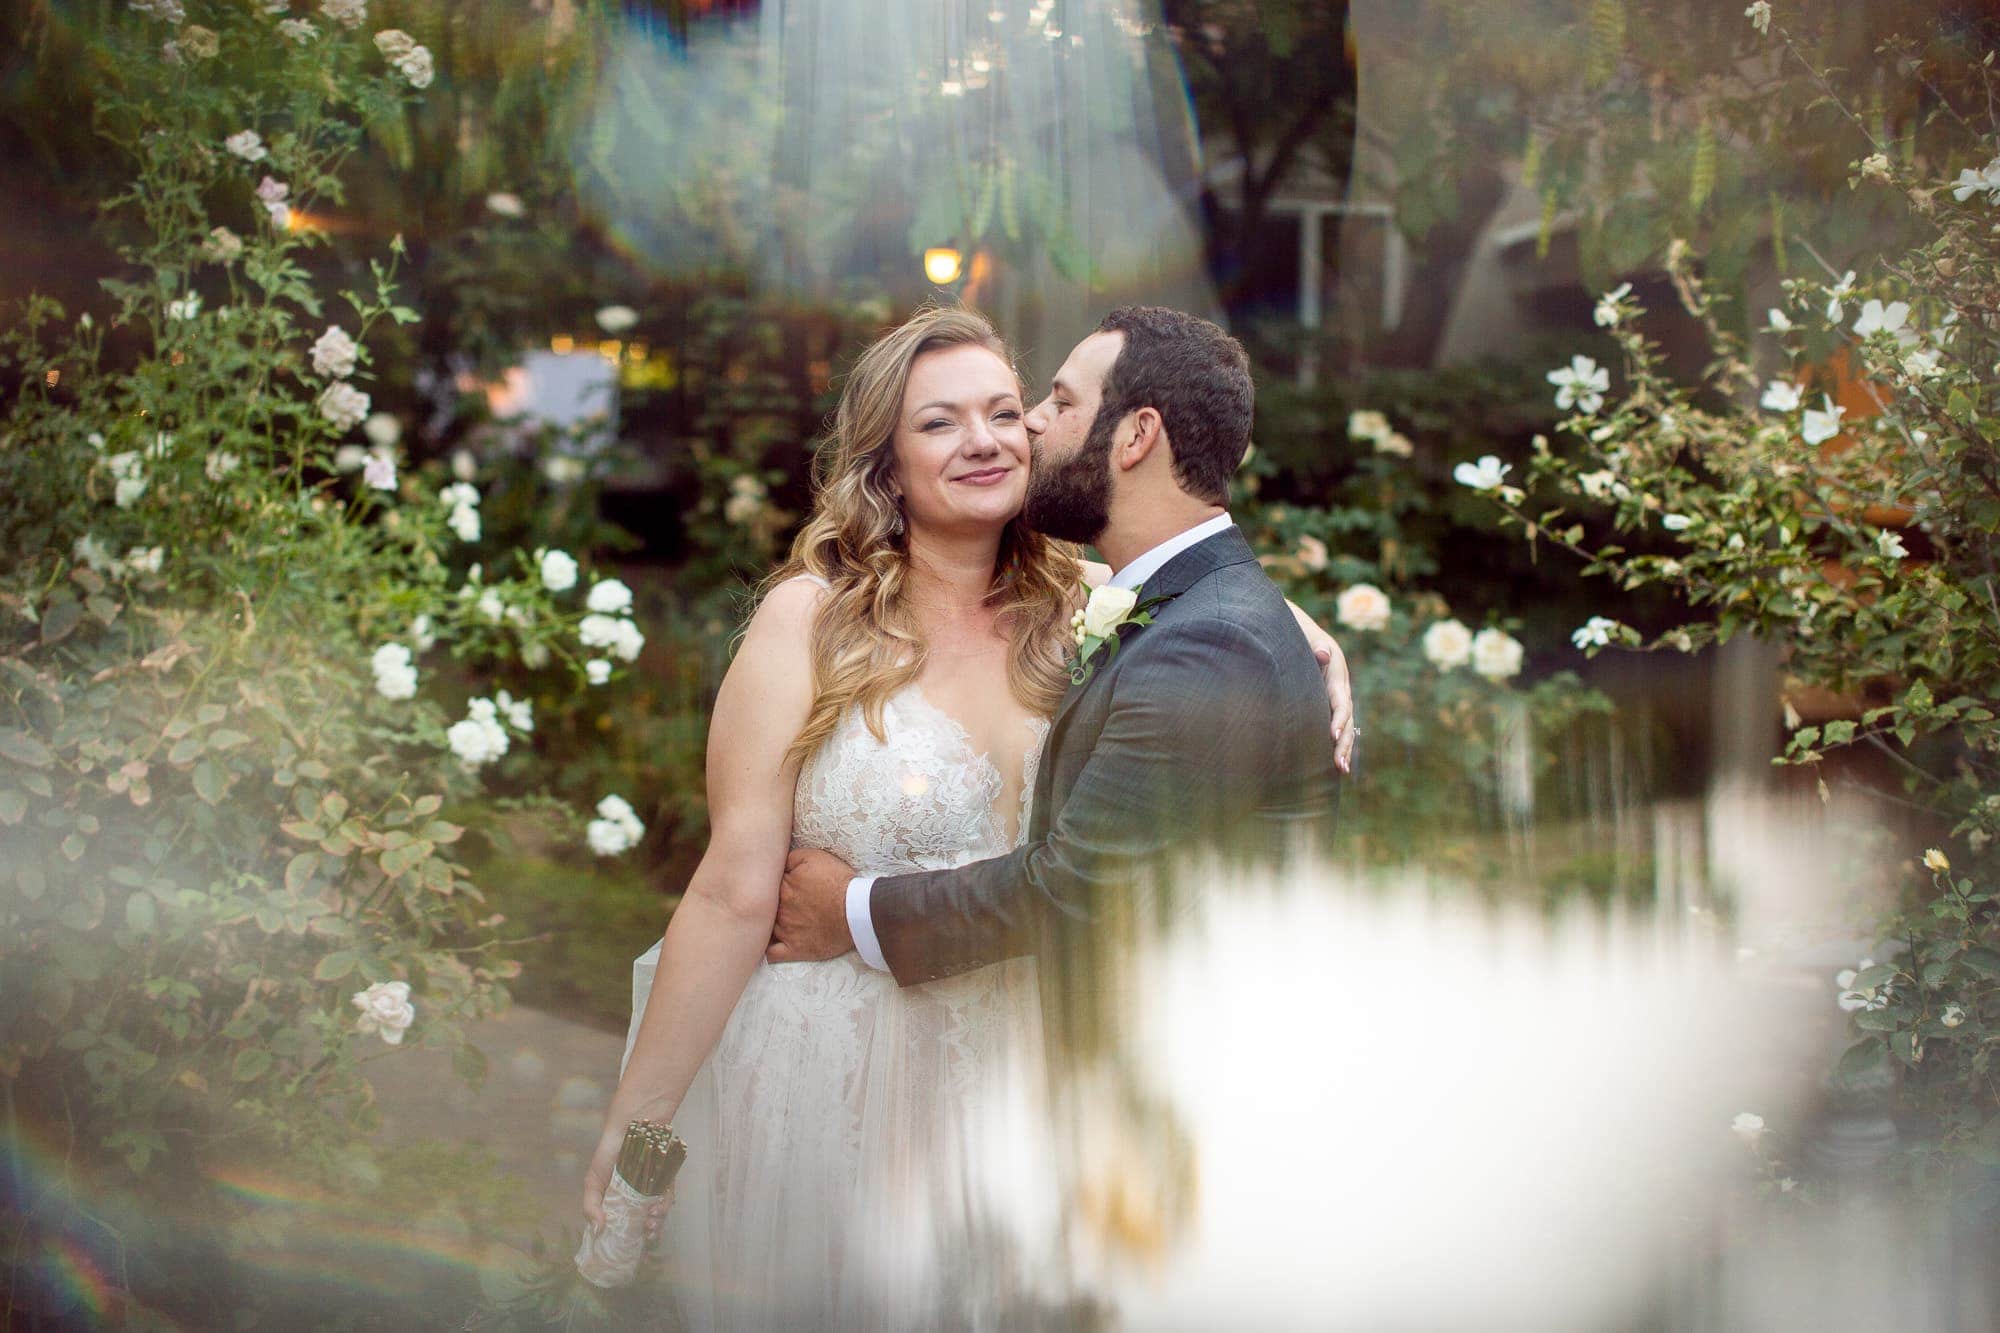 Groom kissing bride on cheek in a garden weeding in Northern California shot with a prism effect